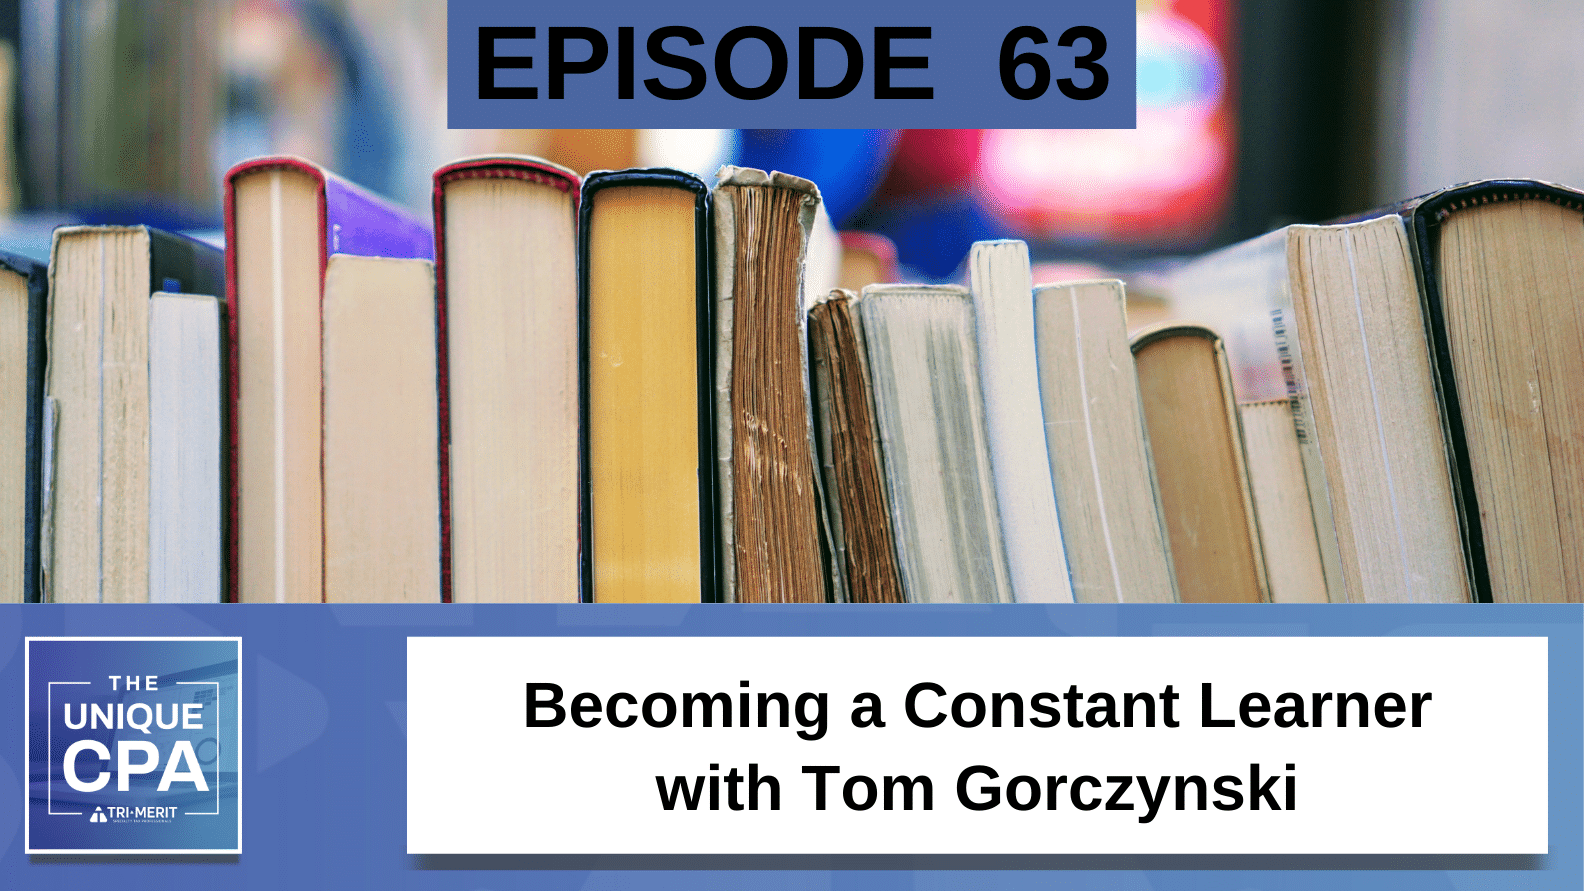 Unique Cpa Featured Image Ep 63 Tom Gorczynski 1 - Becoming A Constant Learner - Tri-Merit